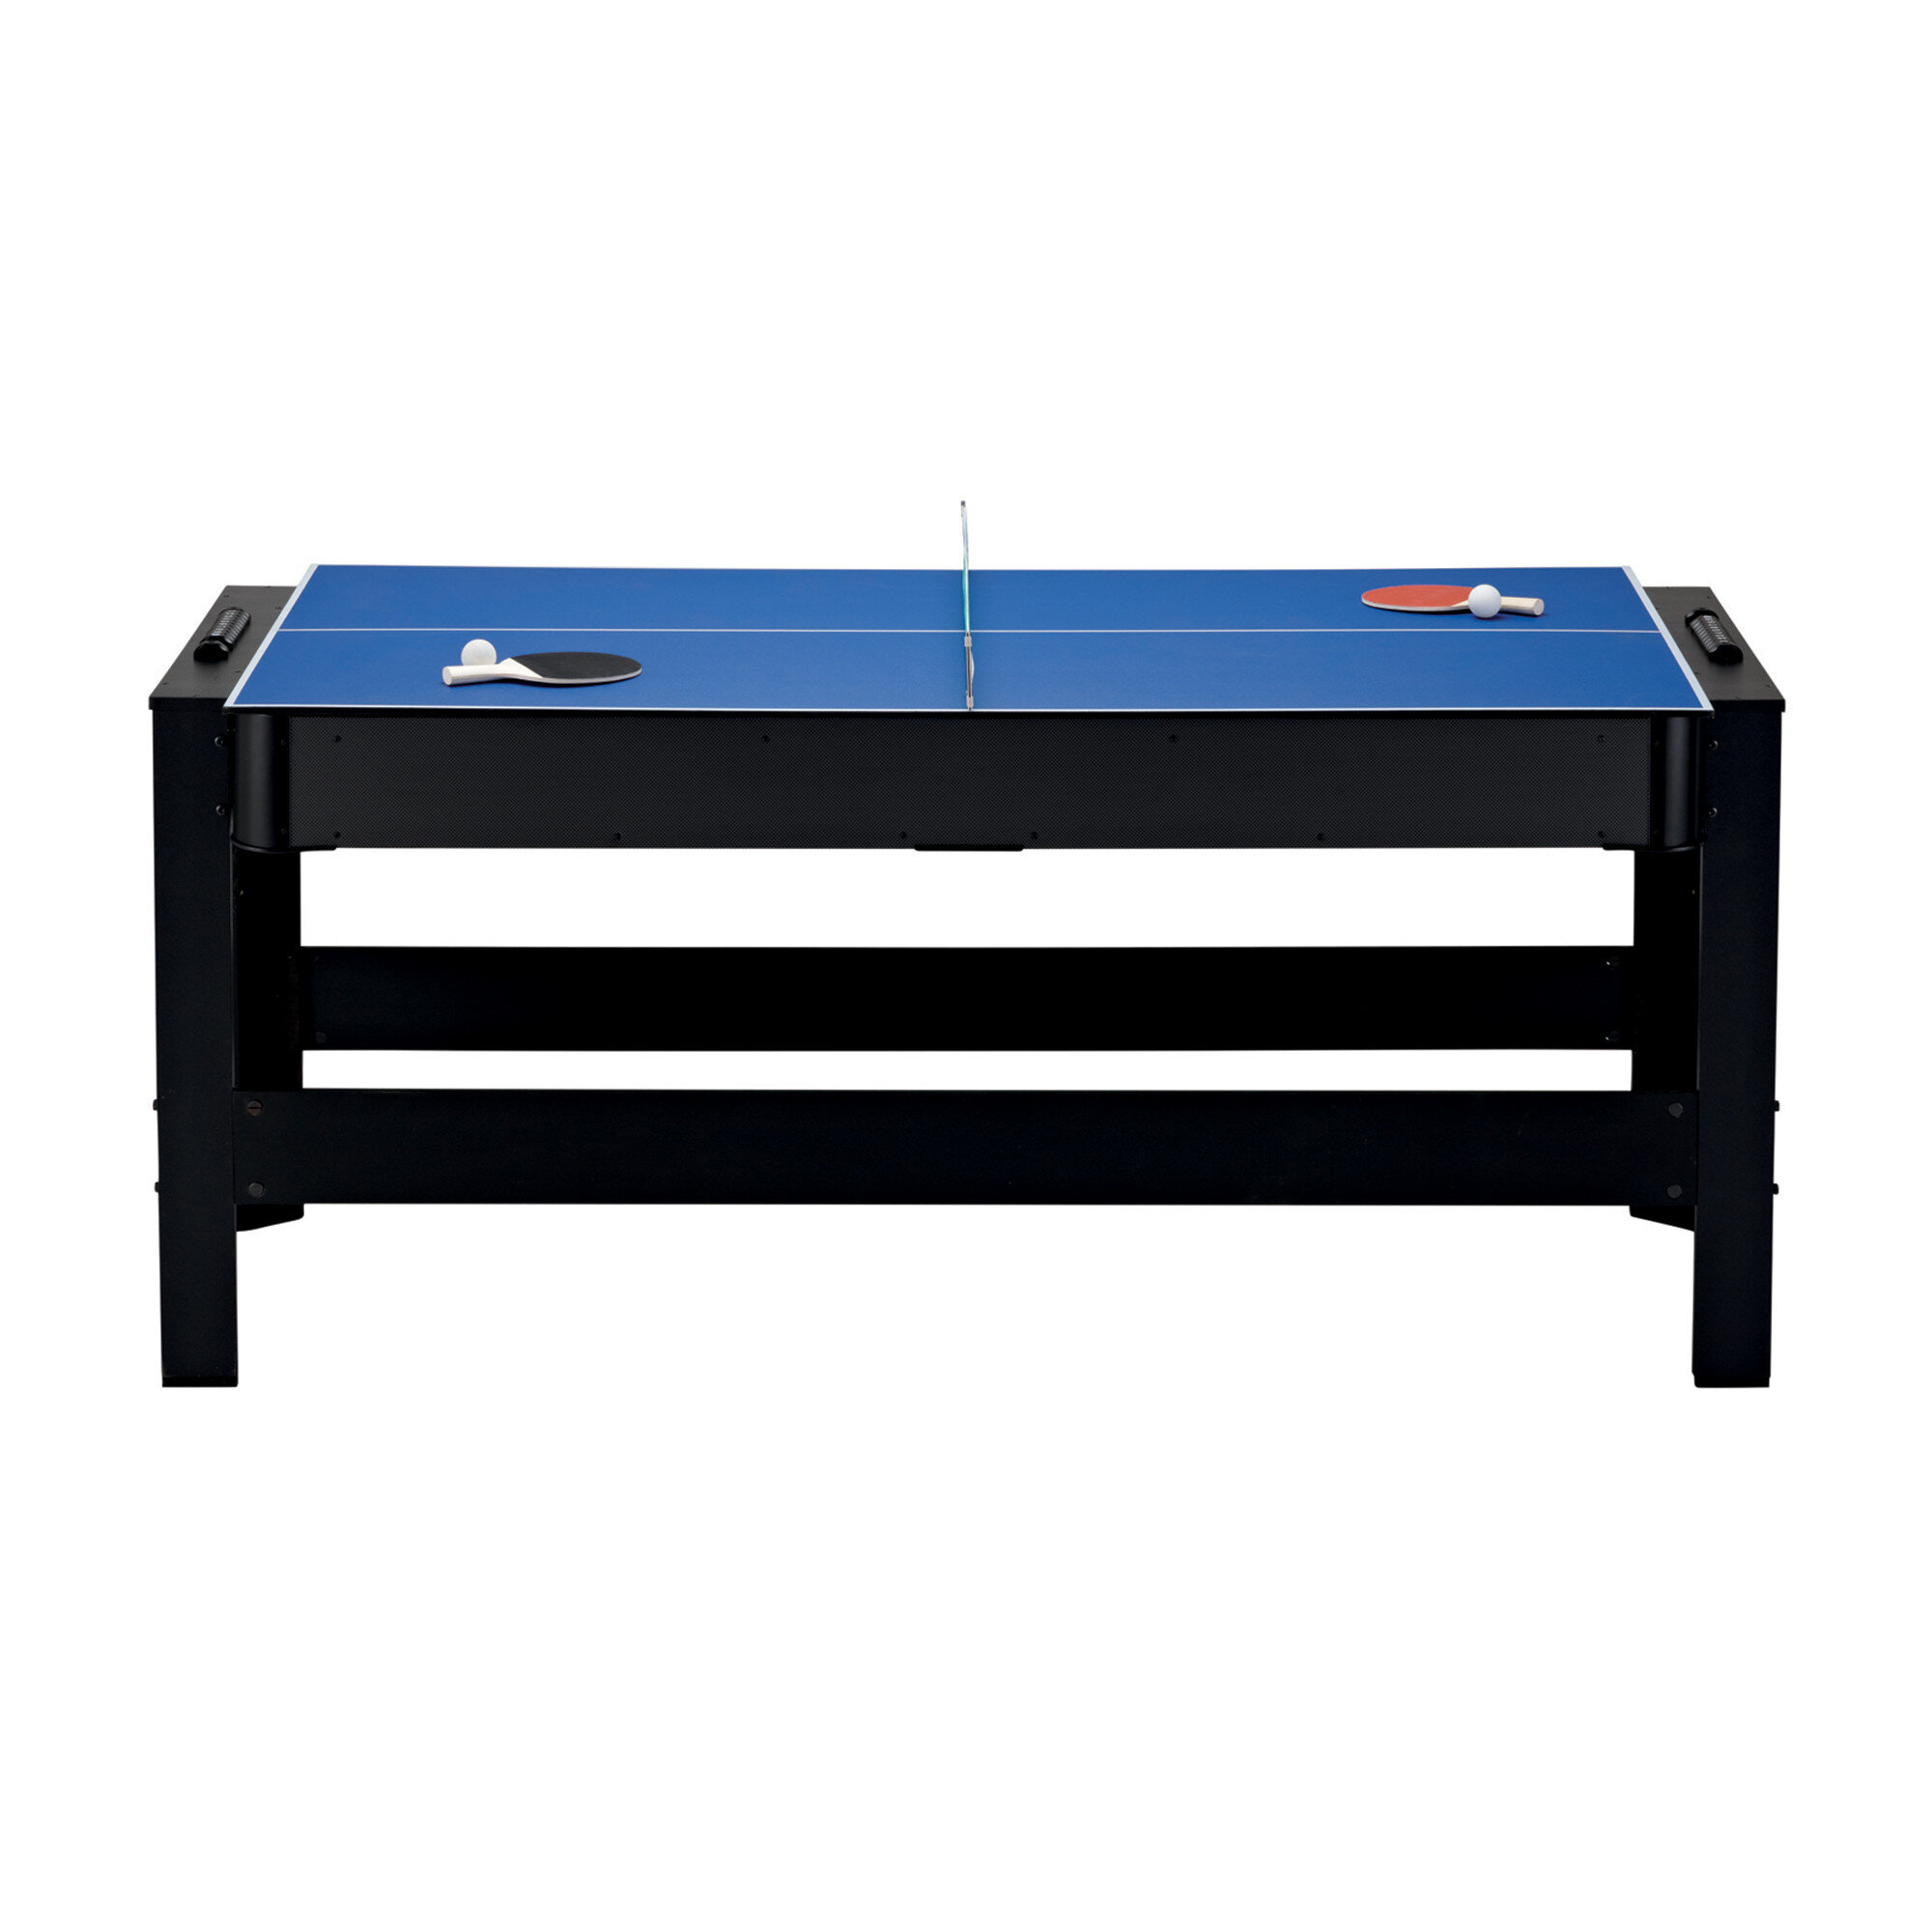 Pockey 3 in 1 Pool, Air Hockey & Ping Pong Table with Blue Cloth by FatCat  FREE SHIPPING